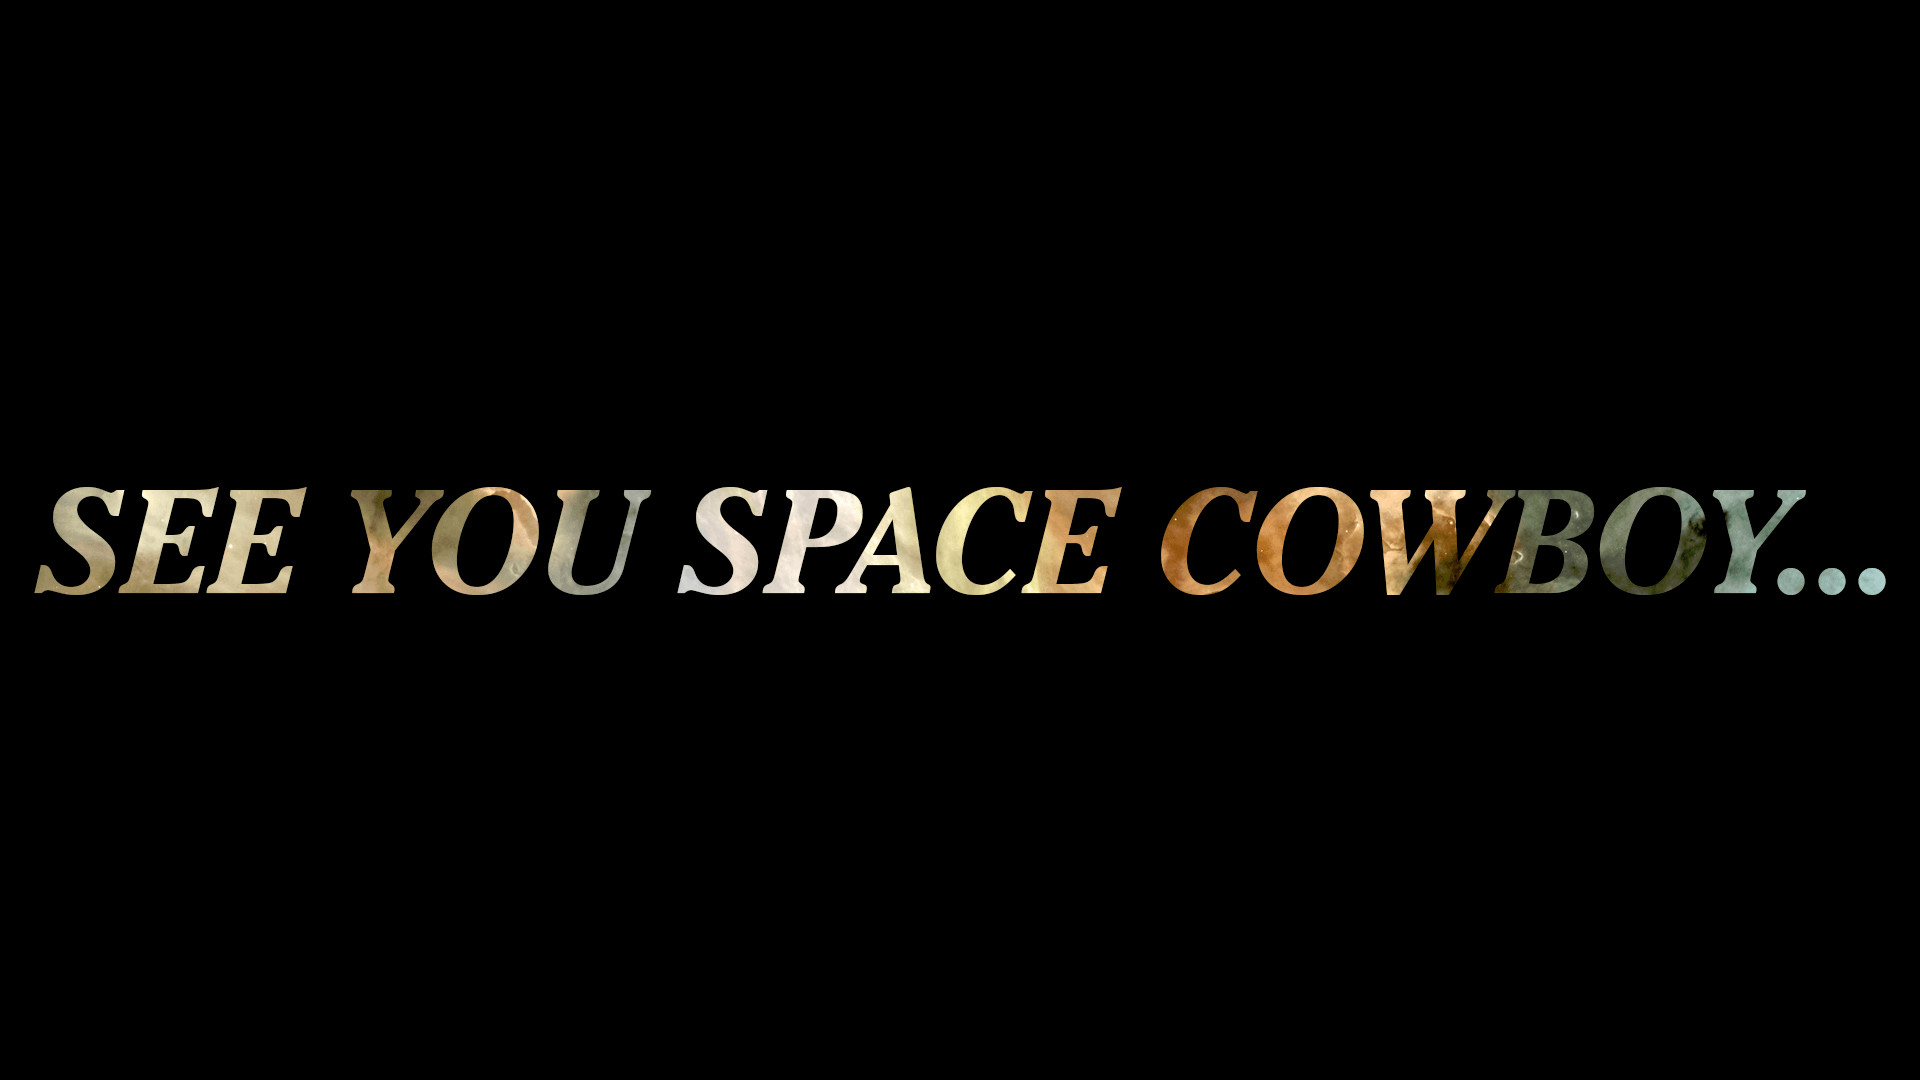 See you seem. See you Space Cowboy. Ковбой Бибоп see you Space Cowboy. See you Space Cowboy обои. See you in Space Cowboy.